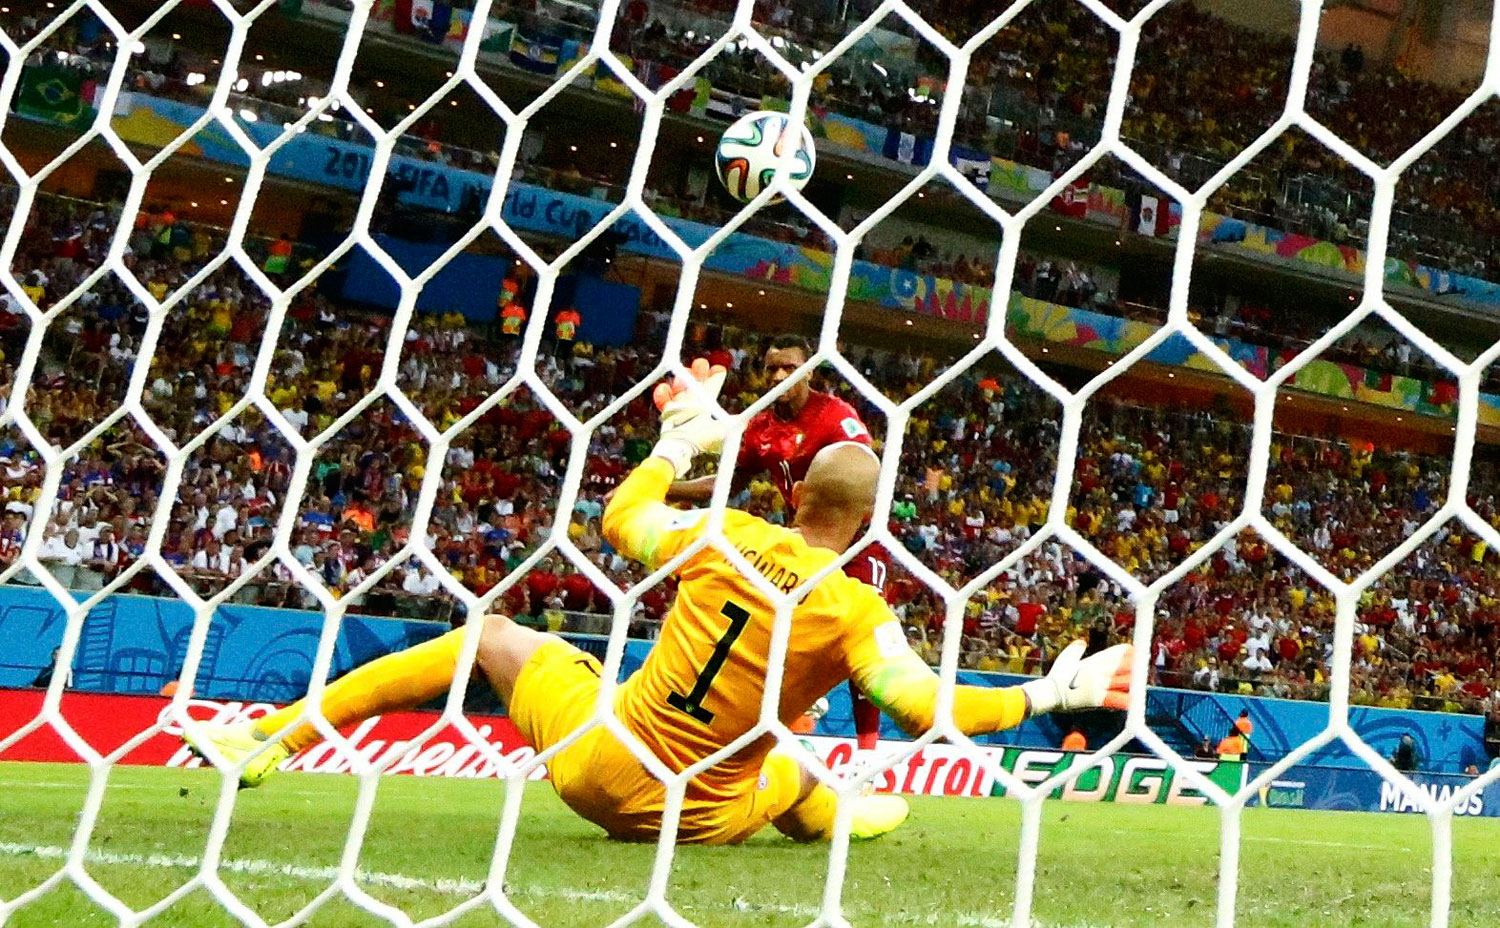 Portugal's Nani scores past goalkeeper Tim Howard of the U.S. during their 2014 World Cup G soccer match at the Amazonia arena